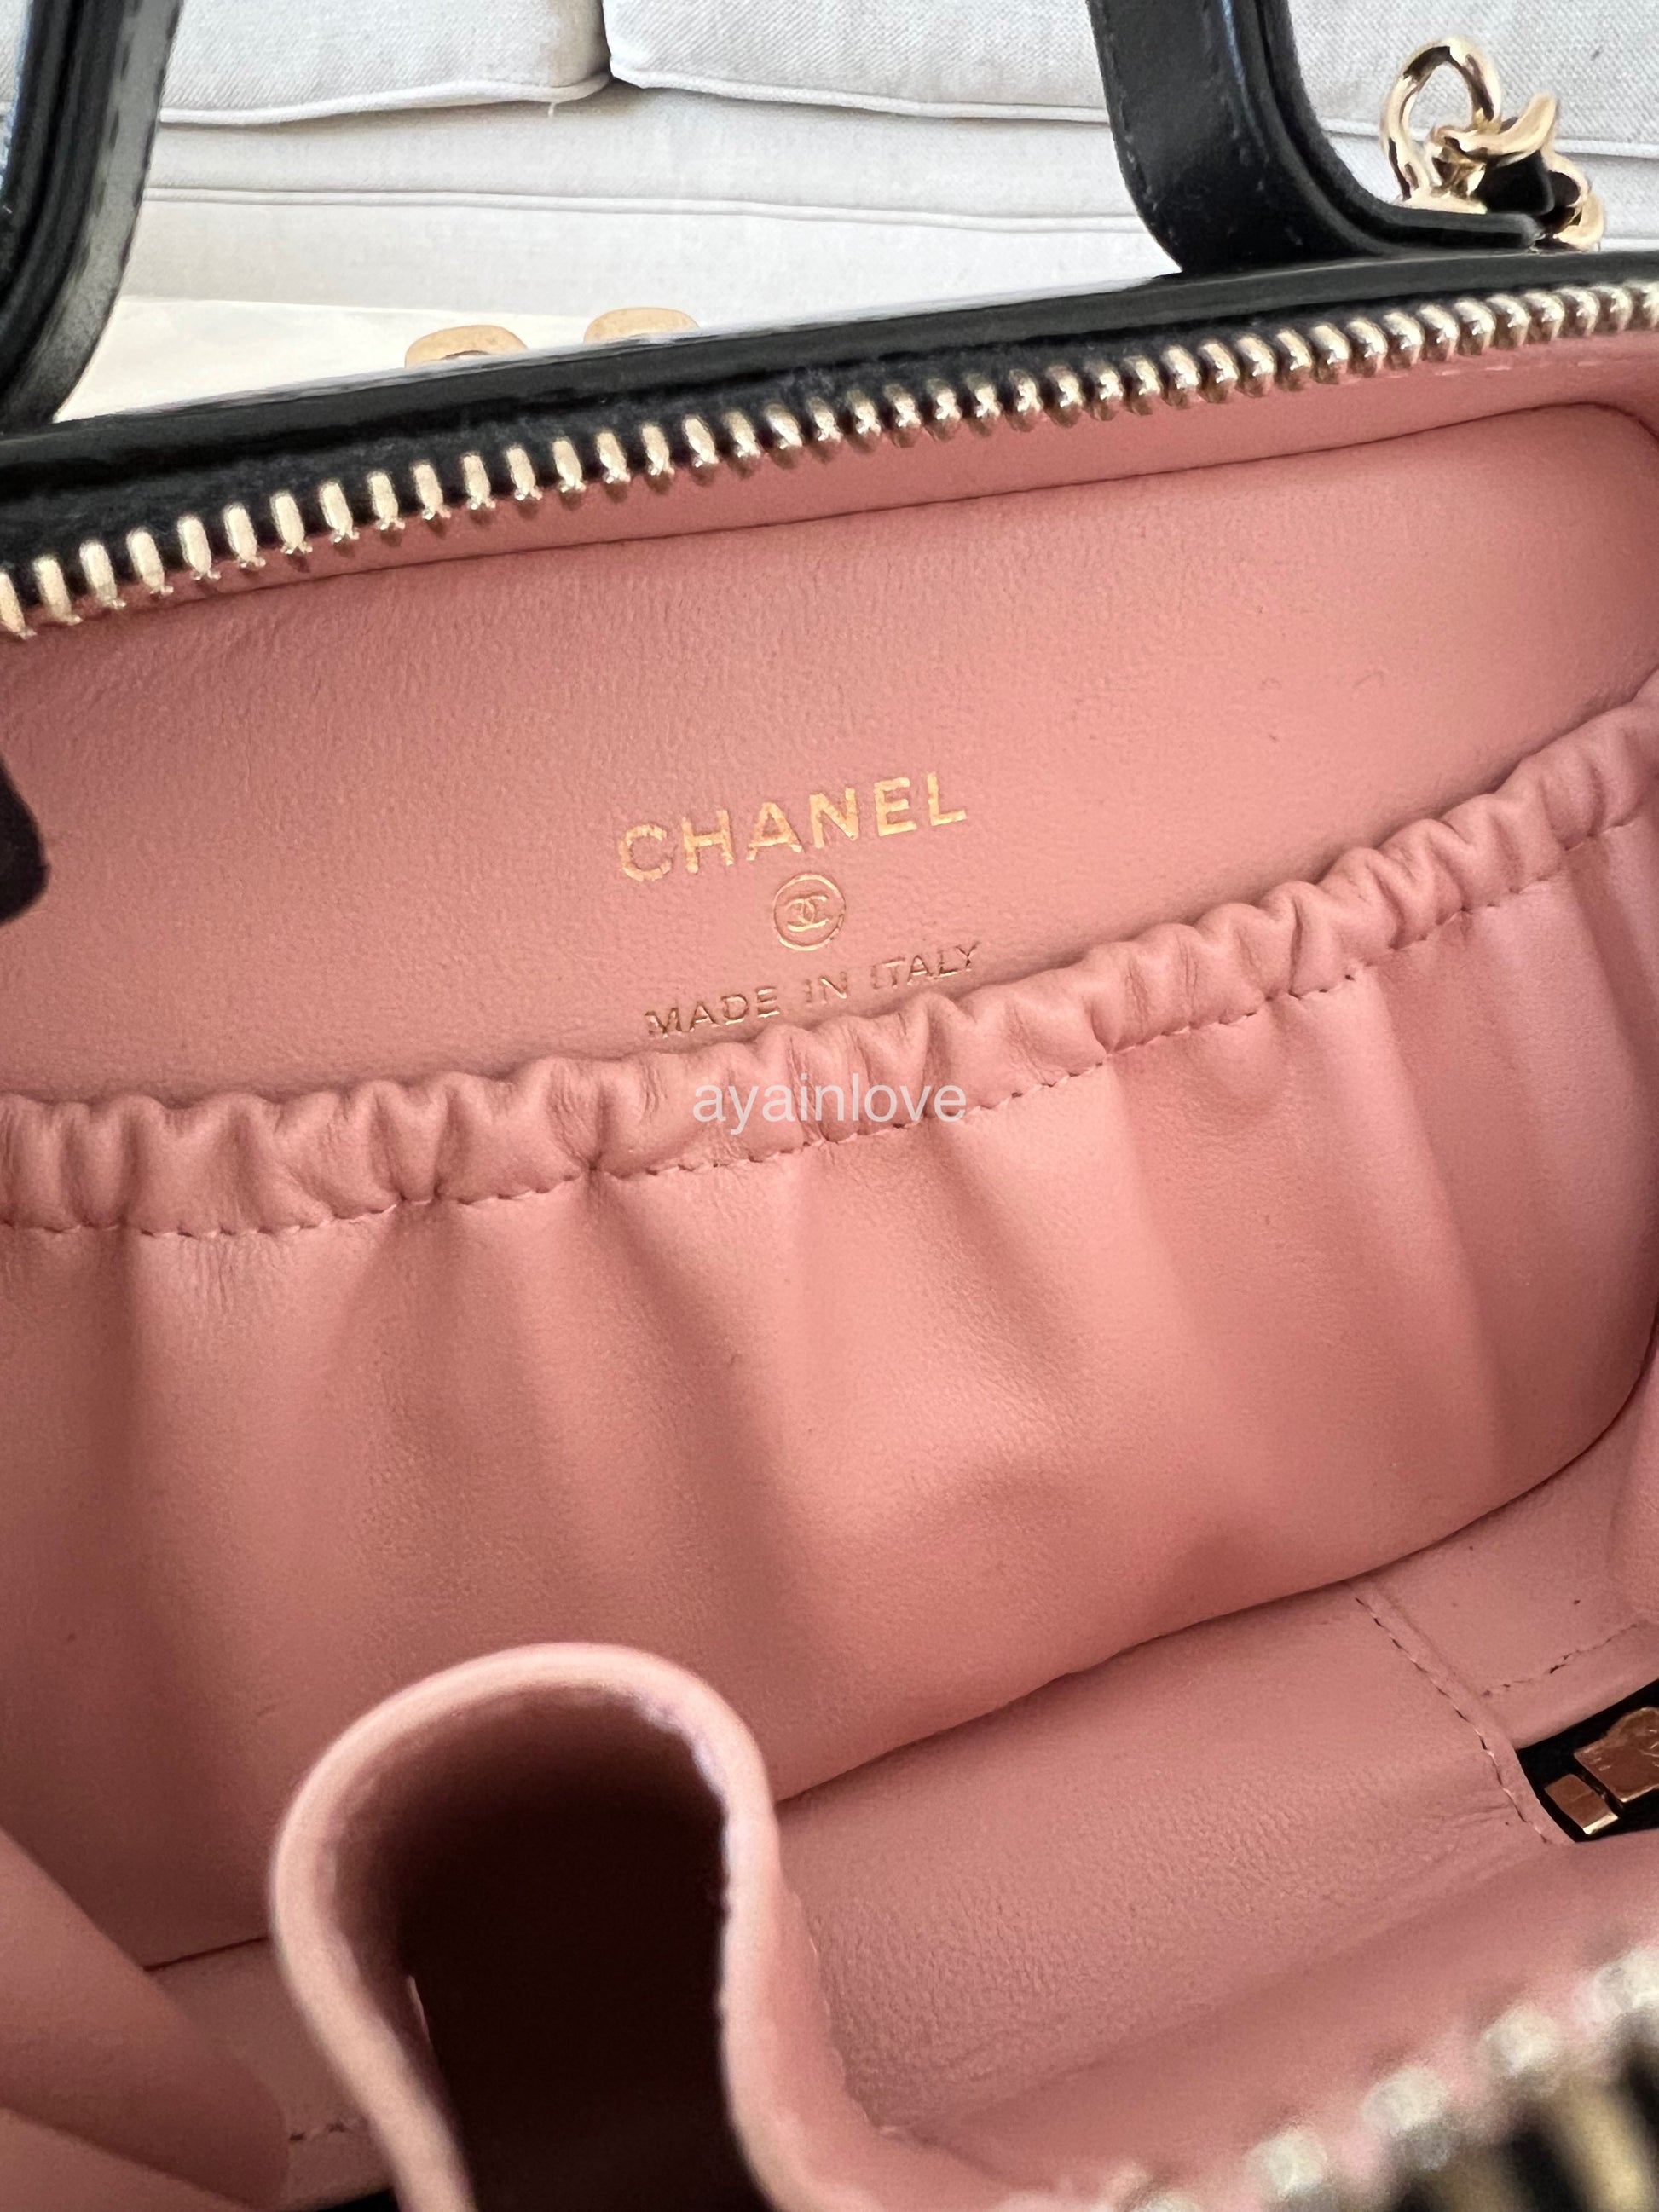 Chanel Small Vanity With Chain Bag In Neon Pink Patent Leather With Gold  Hardware